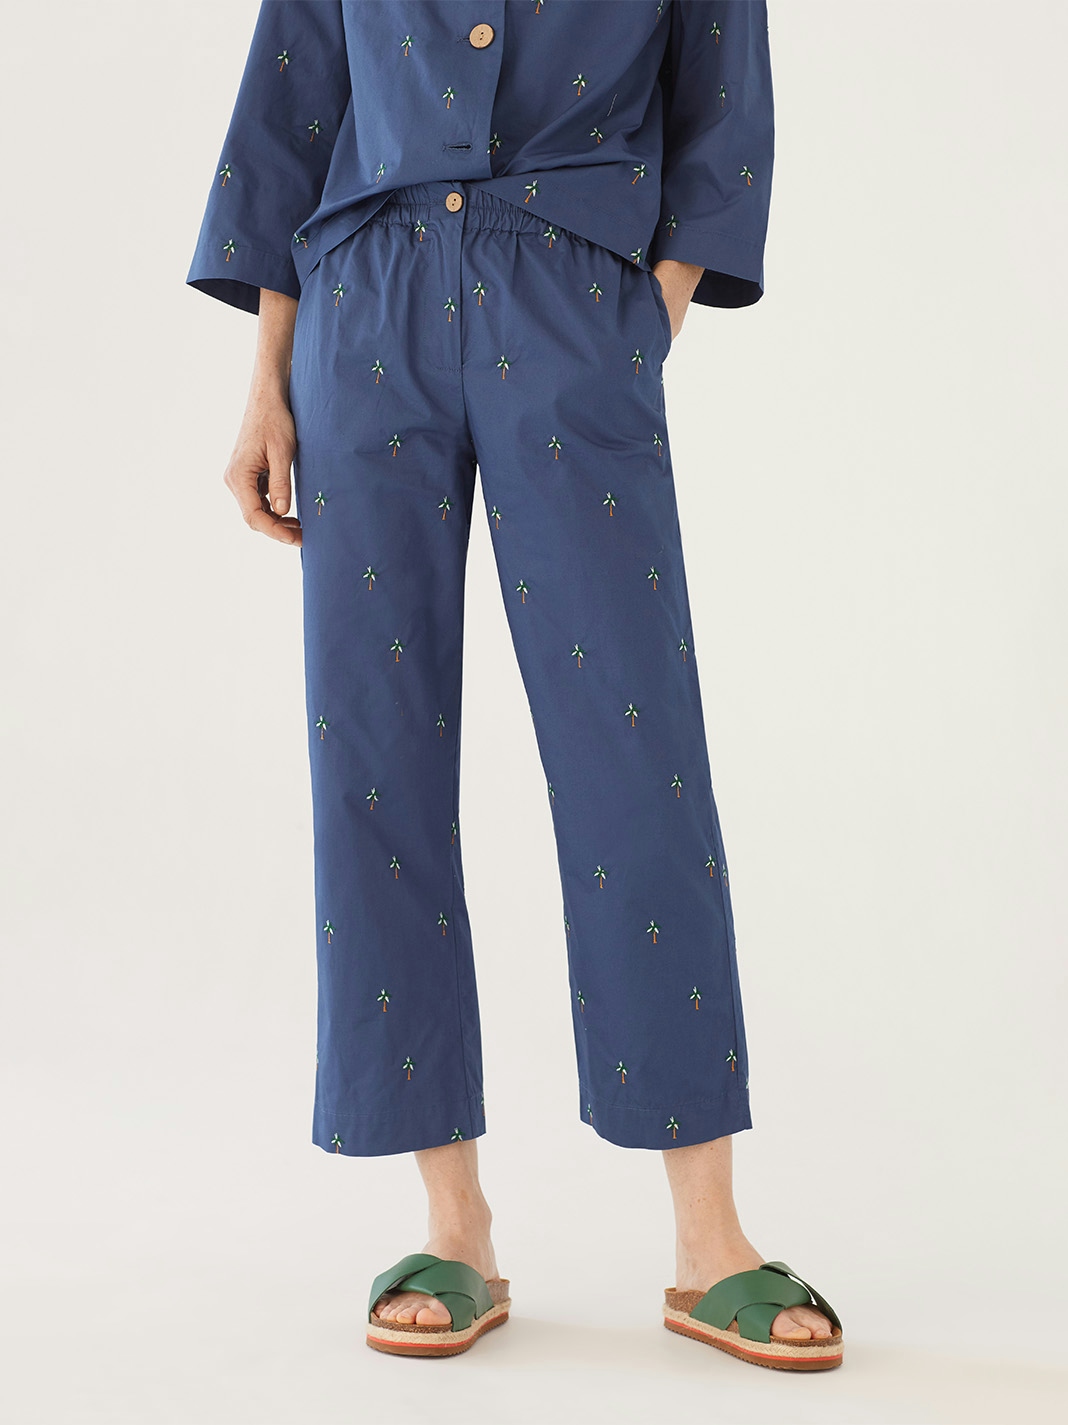 Palms embroidered trousers